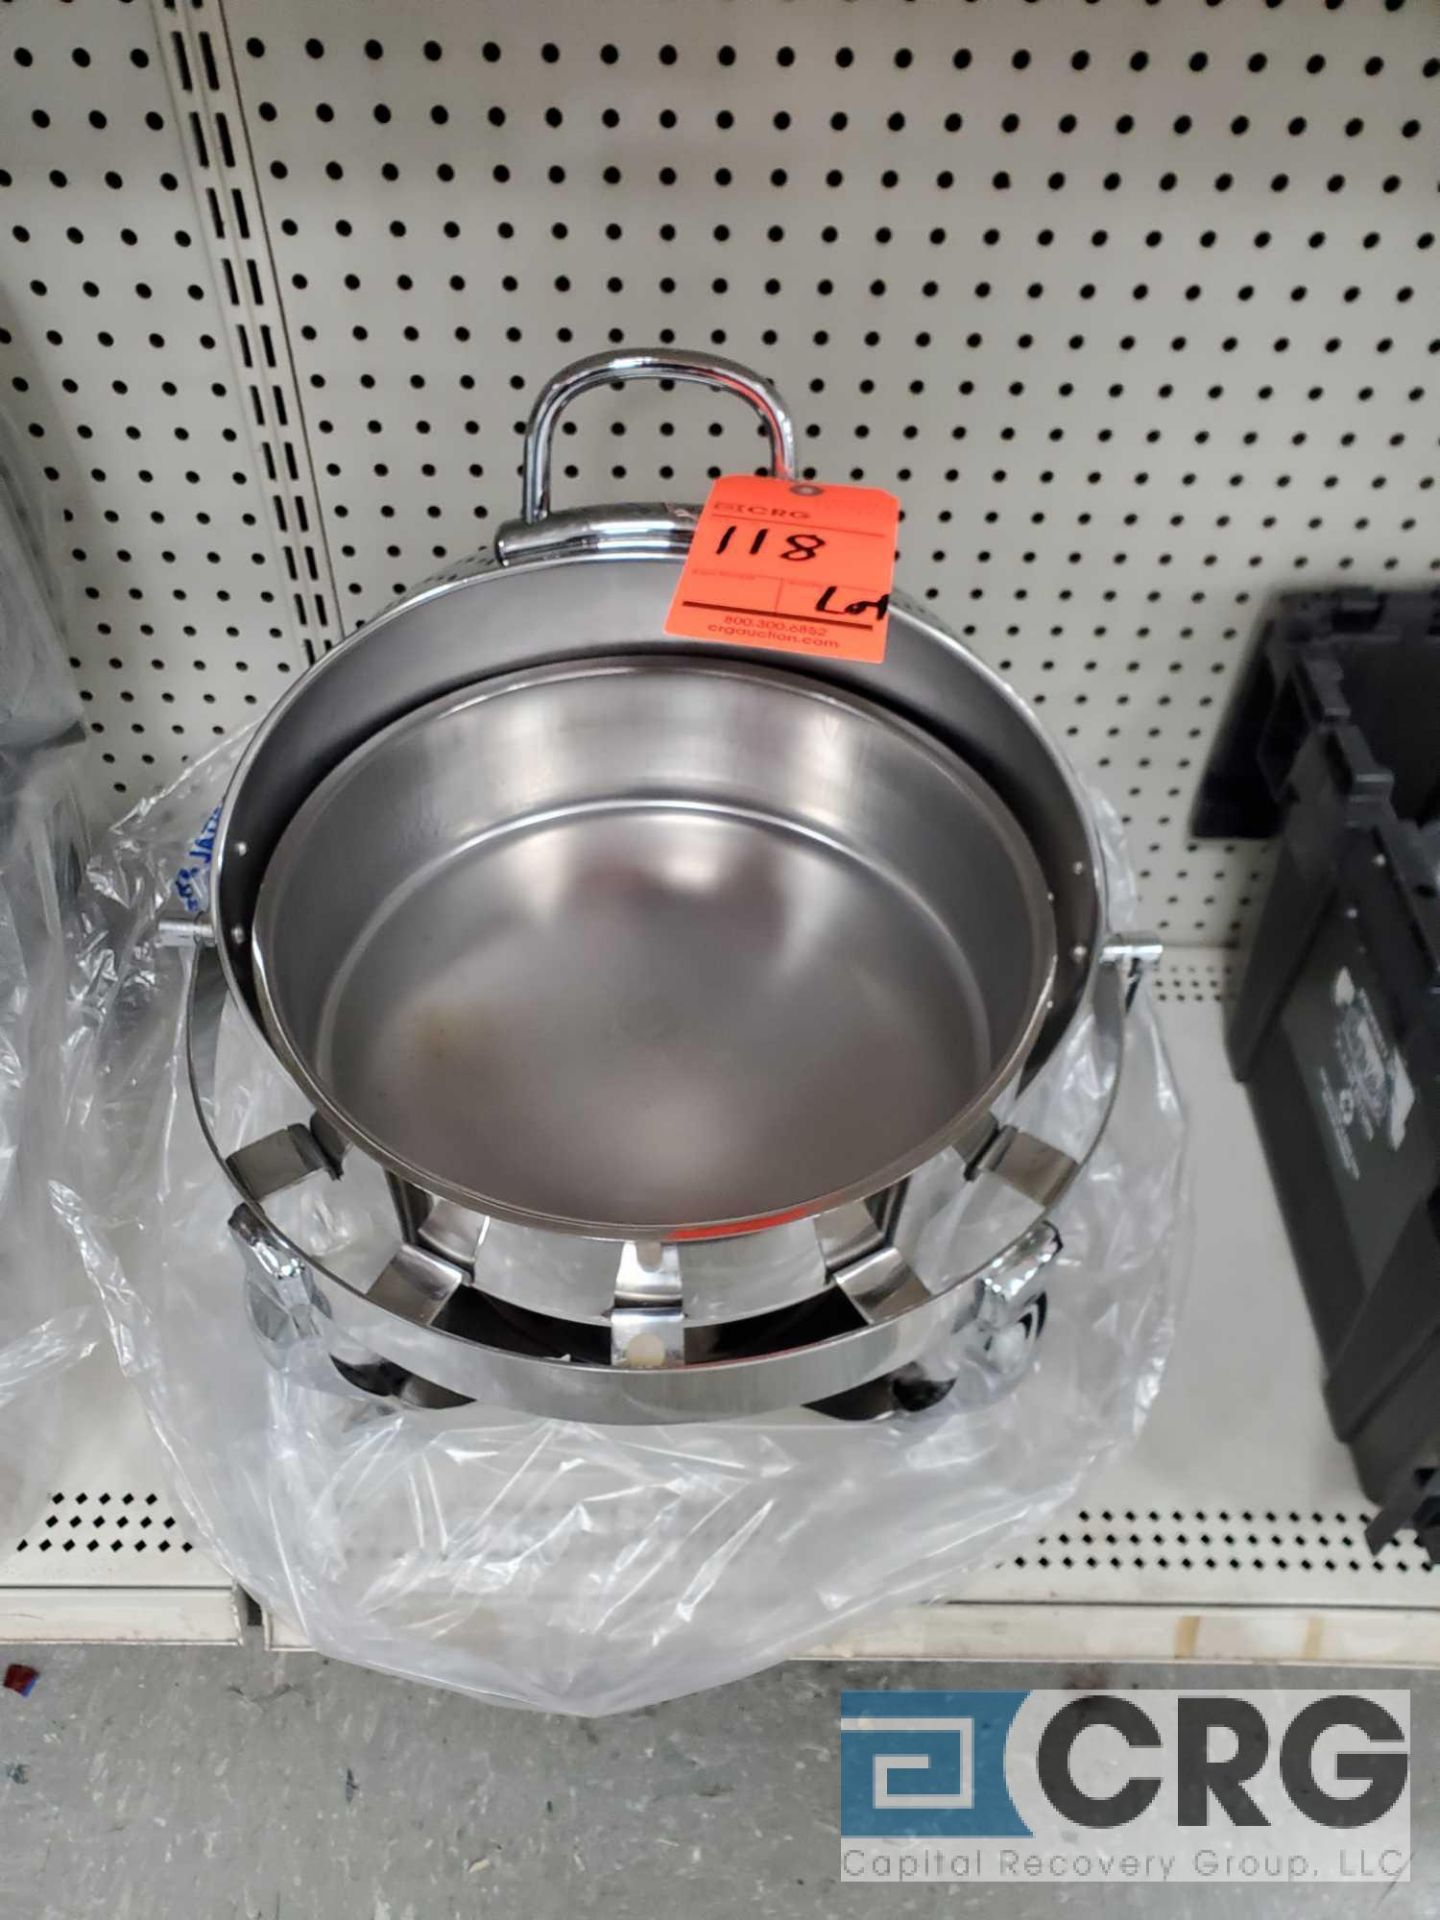 Lot of (2) 6 Qt round stainless chafing dish, 14 in. diameter - Image 4 of 4